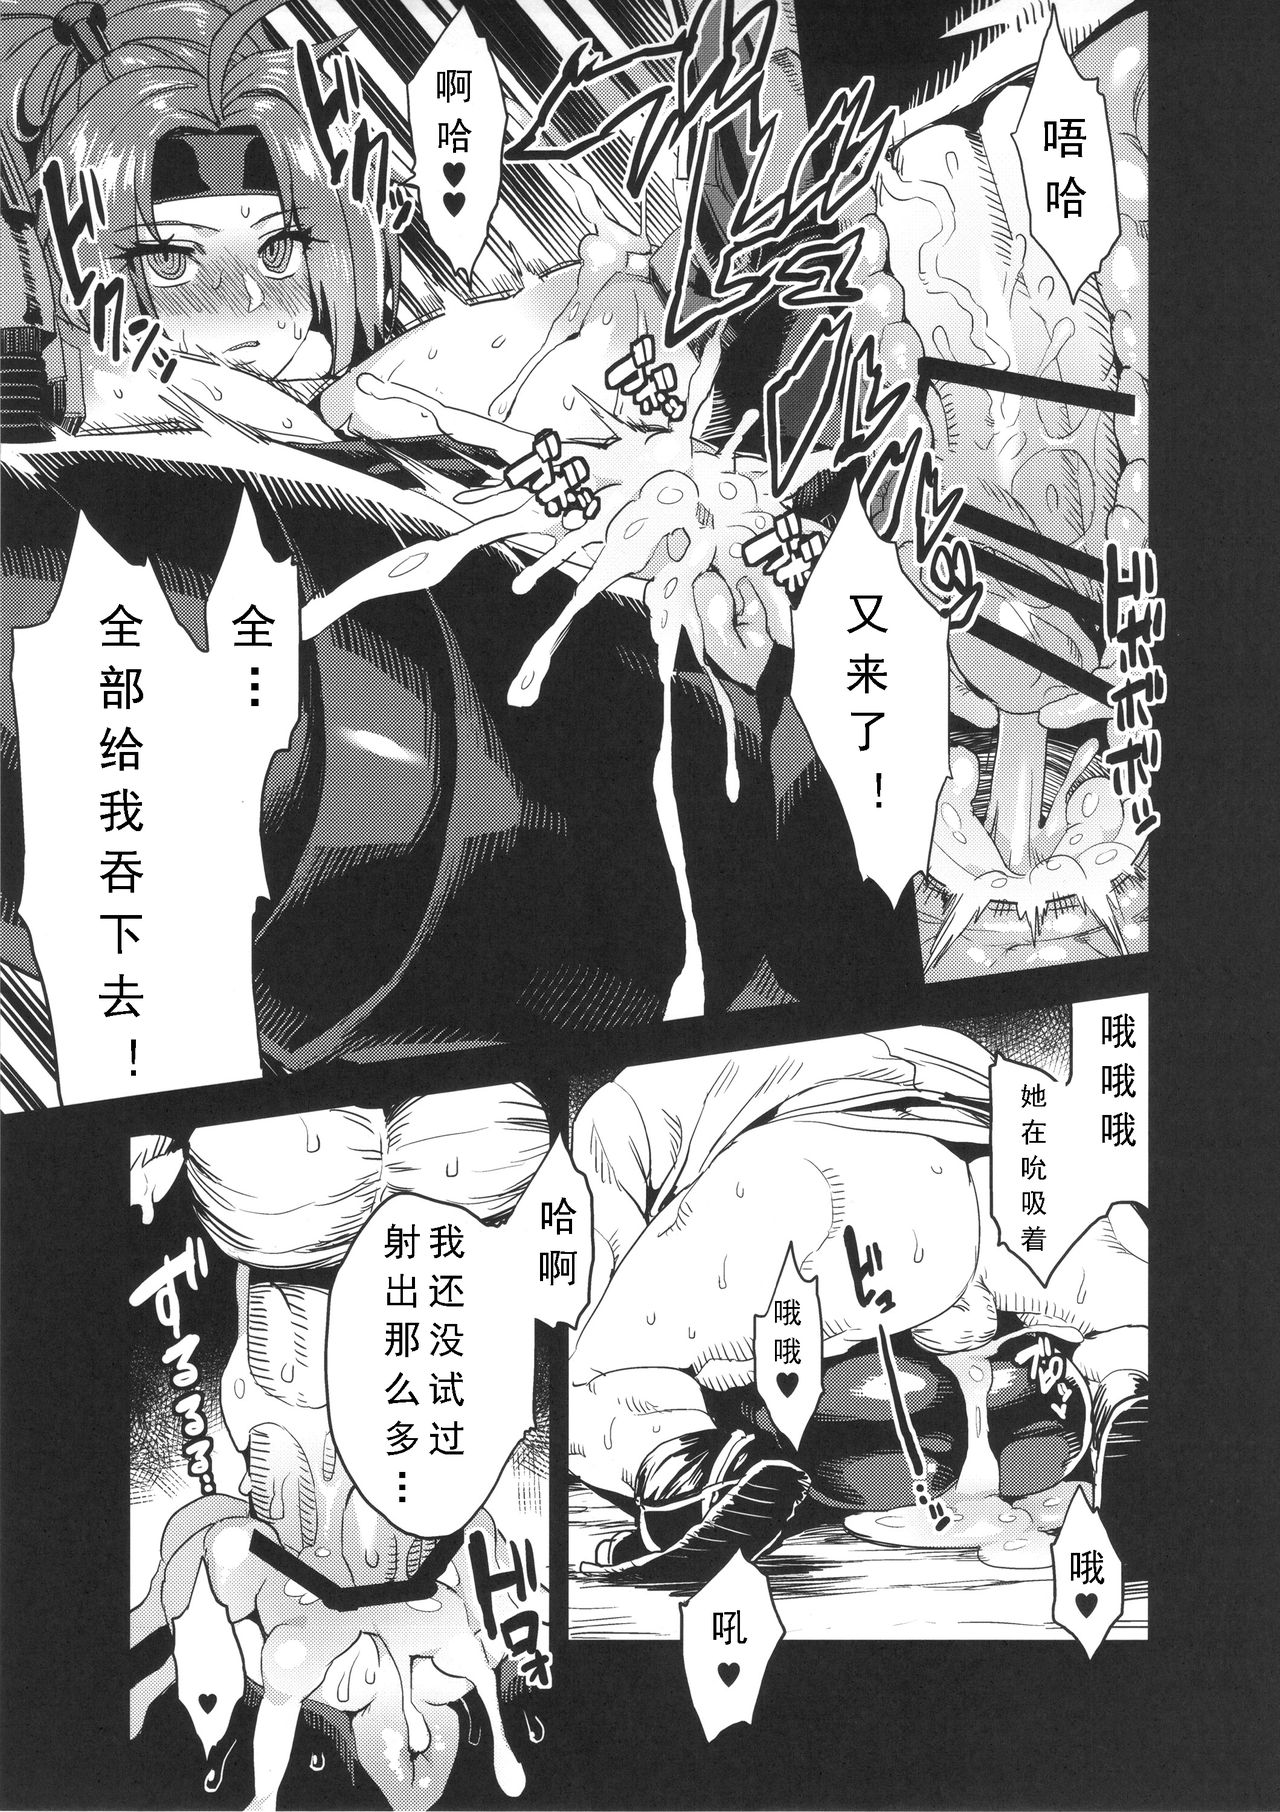 (C89) [OVing (Obui)] Hentai Marionette 4 (Saber Marionette J) [Chinese] [可乐个人汉化] page 21 full